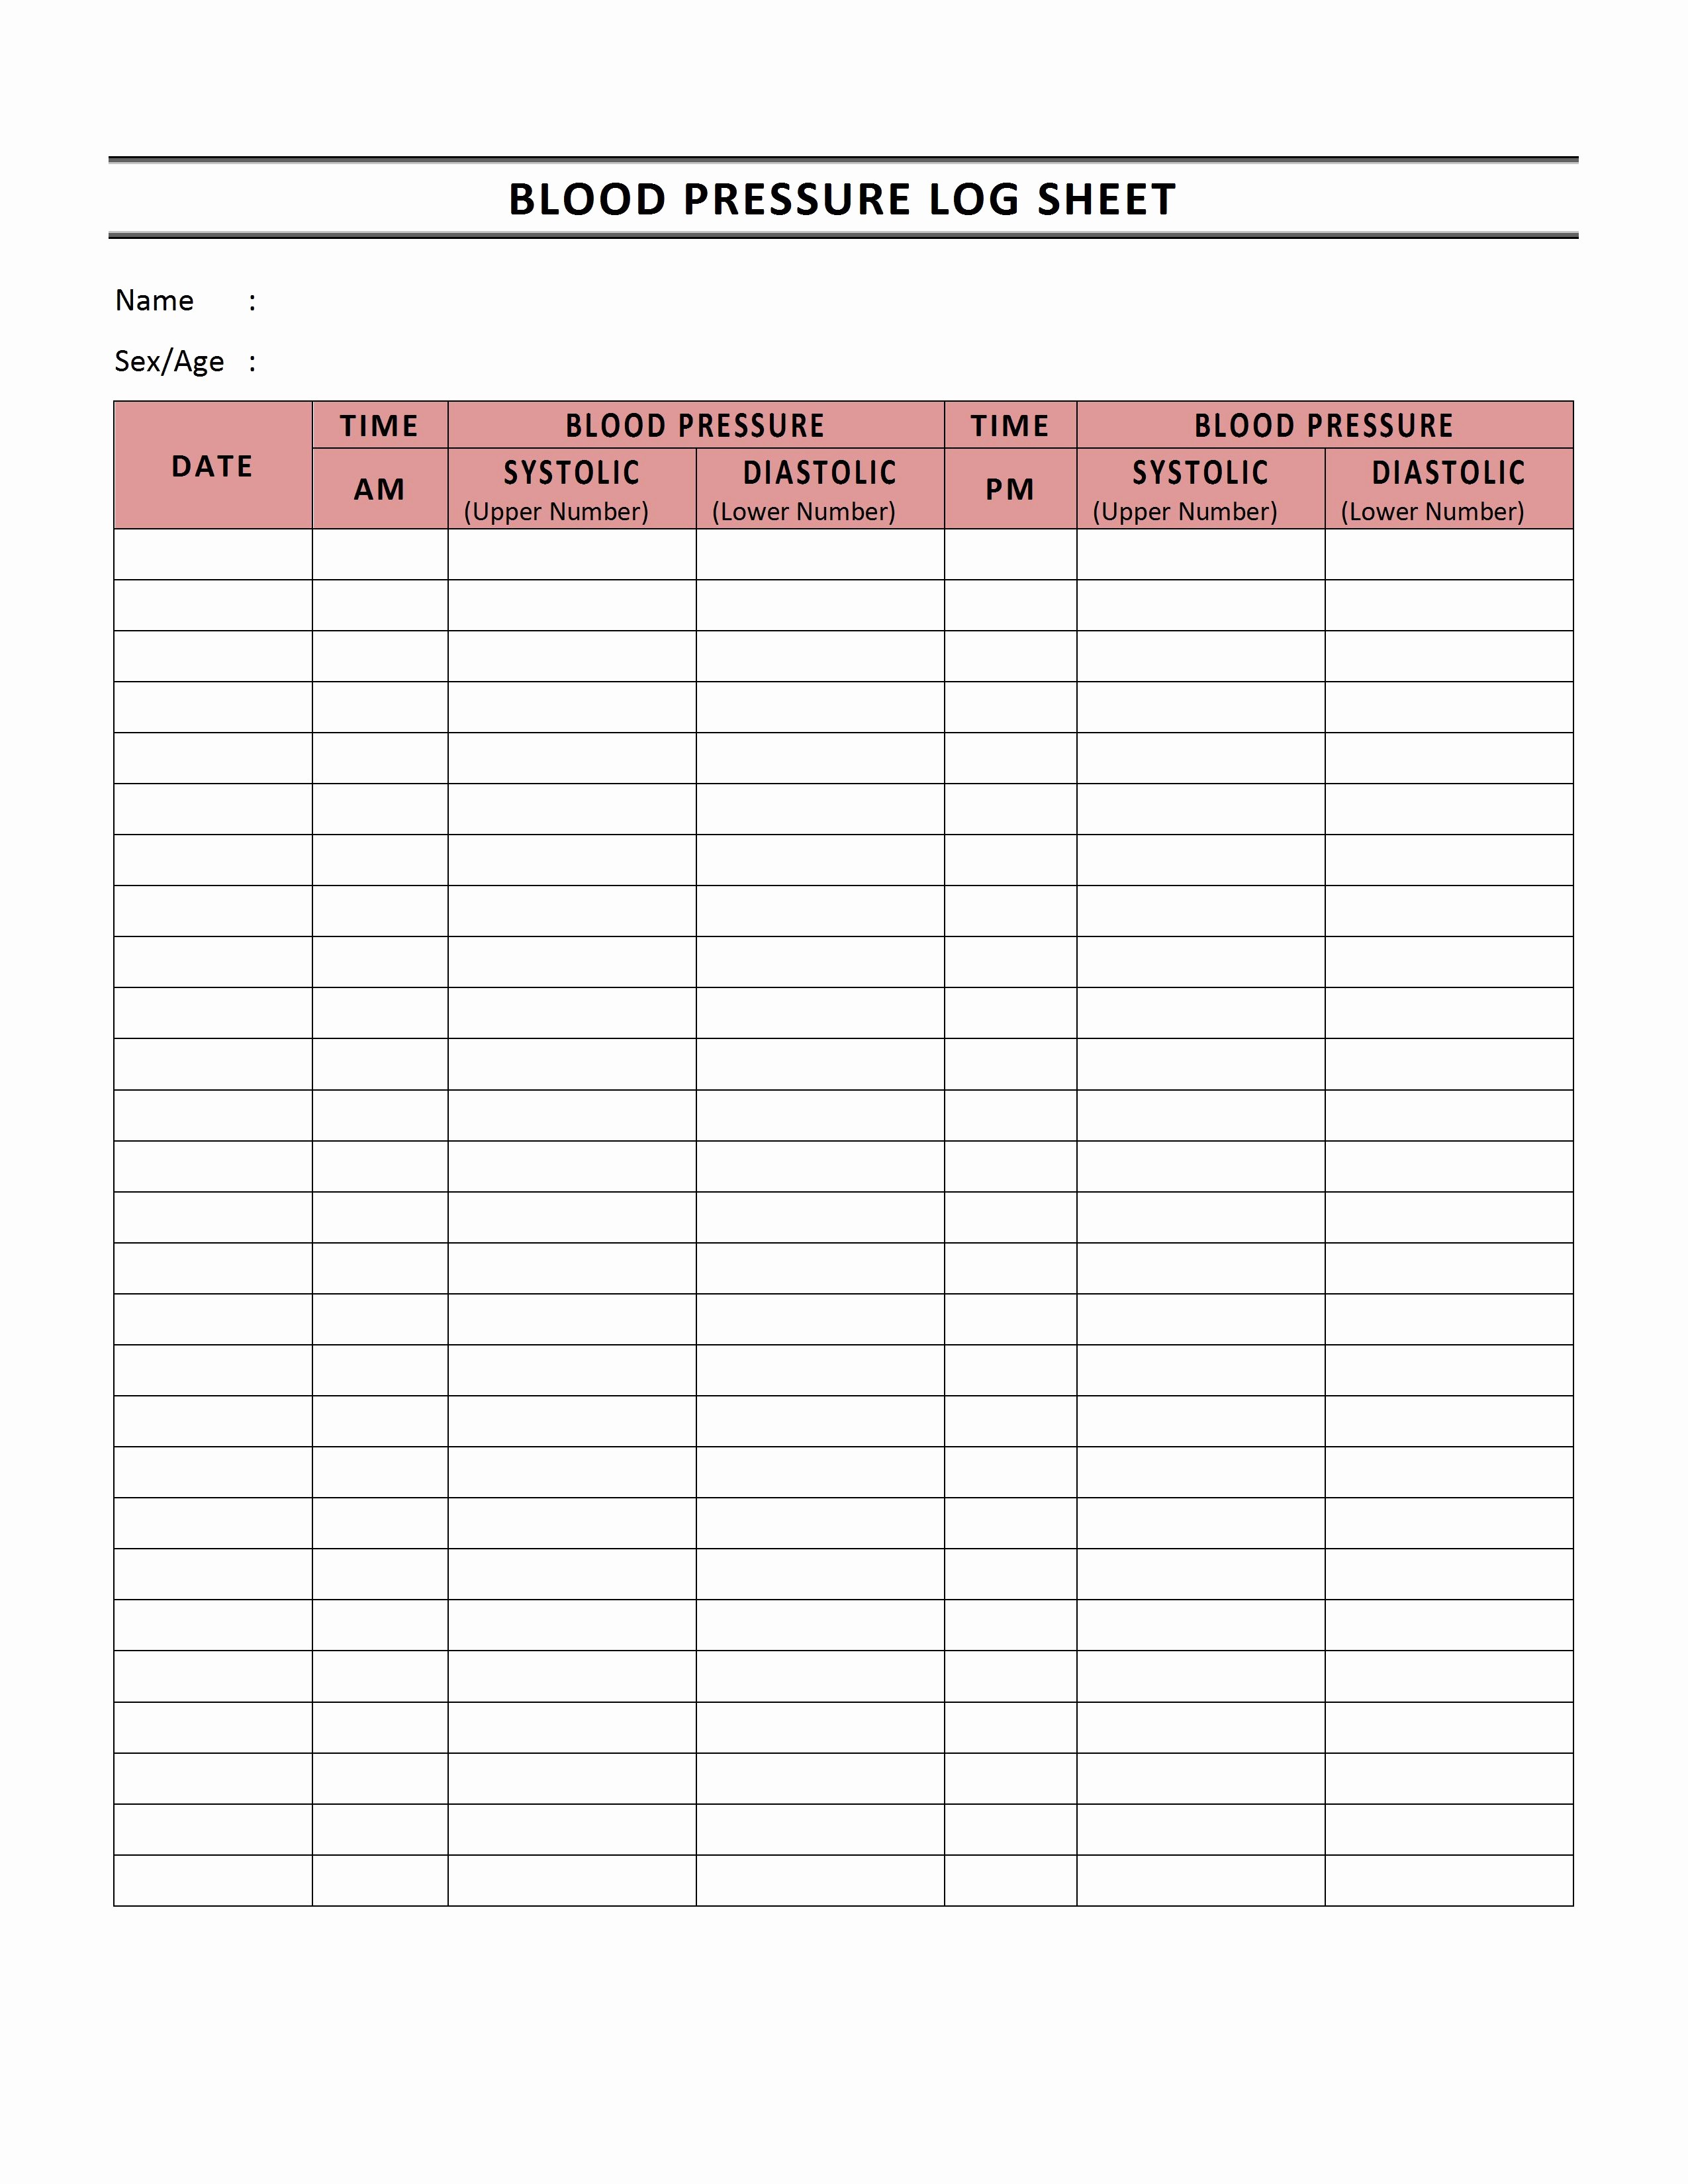 Blood Pressure Log Print Out Awesome Blood Pressure Log Template Ms Word Templates